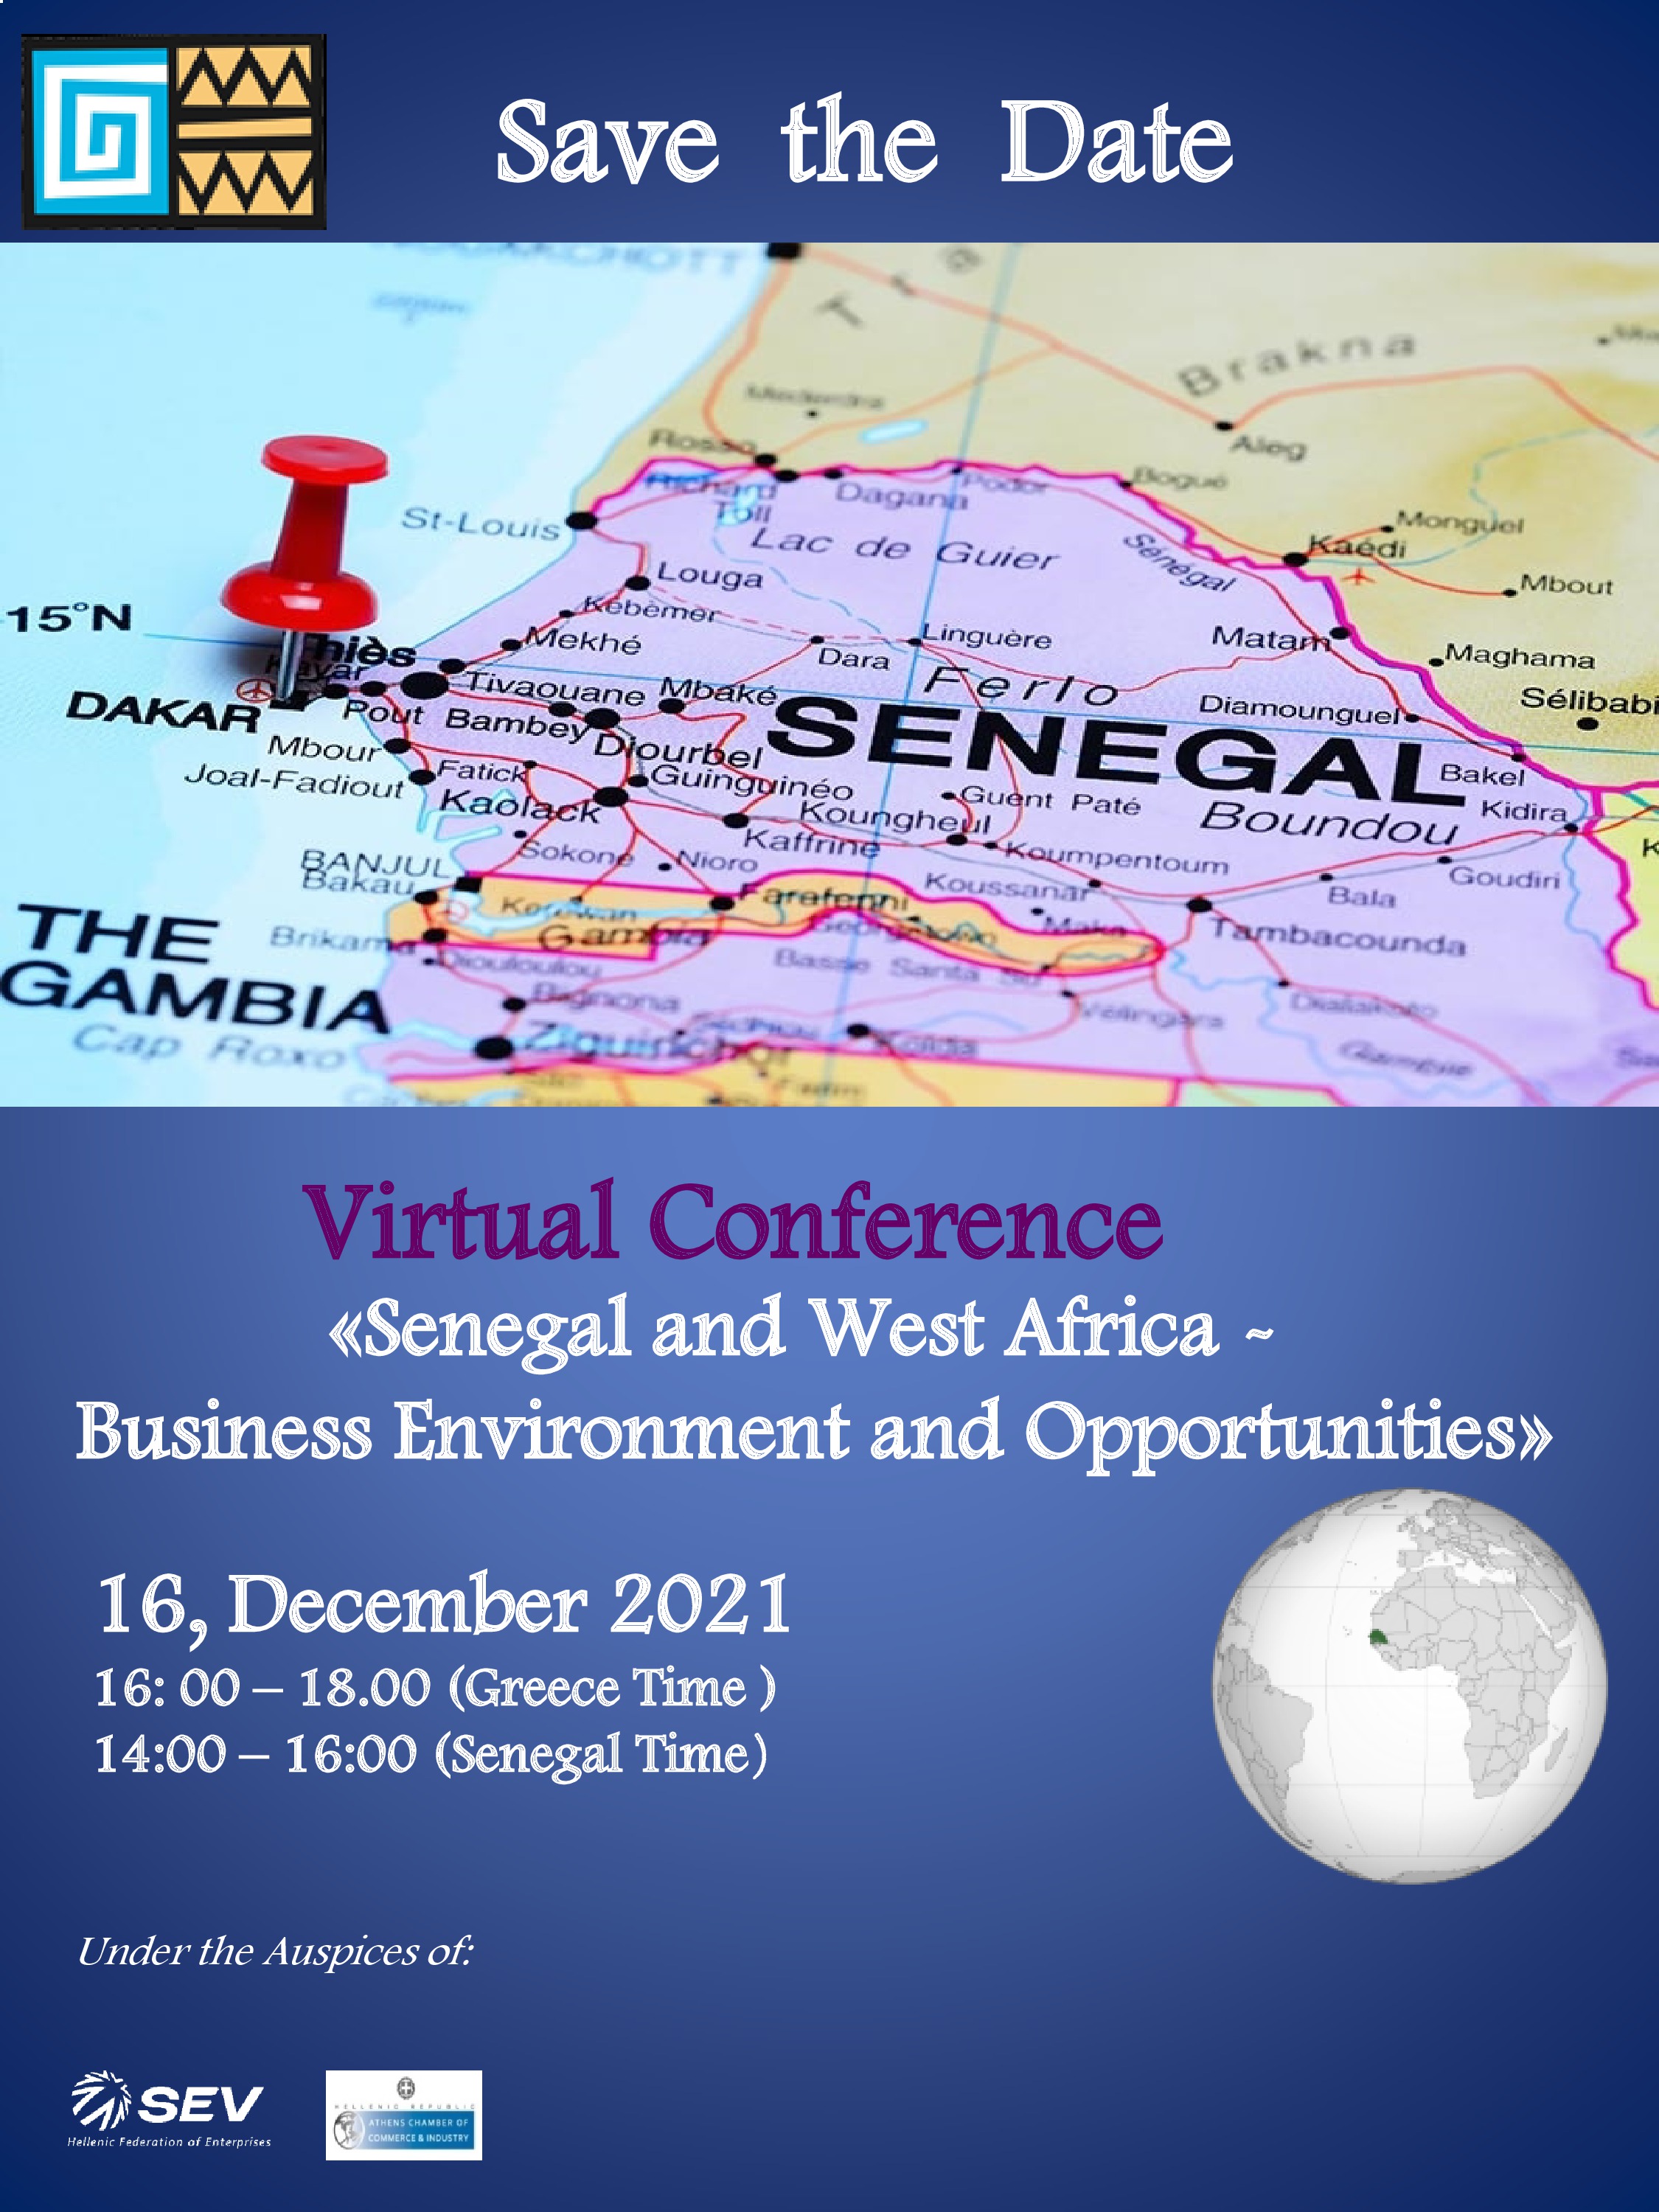 Virtual Conference ««Senegal: Business Environment and Opportunities»